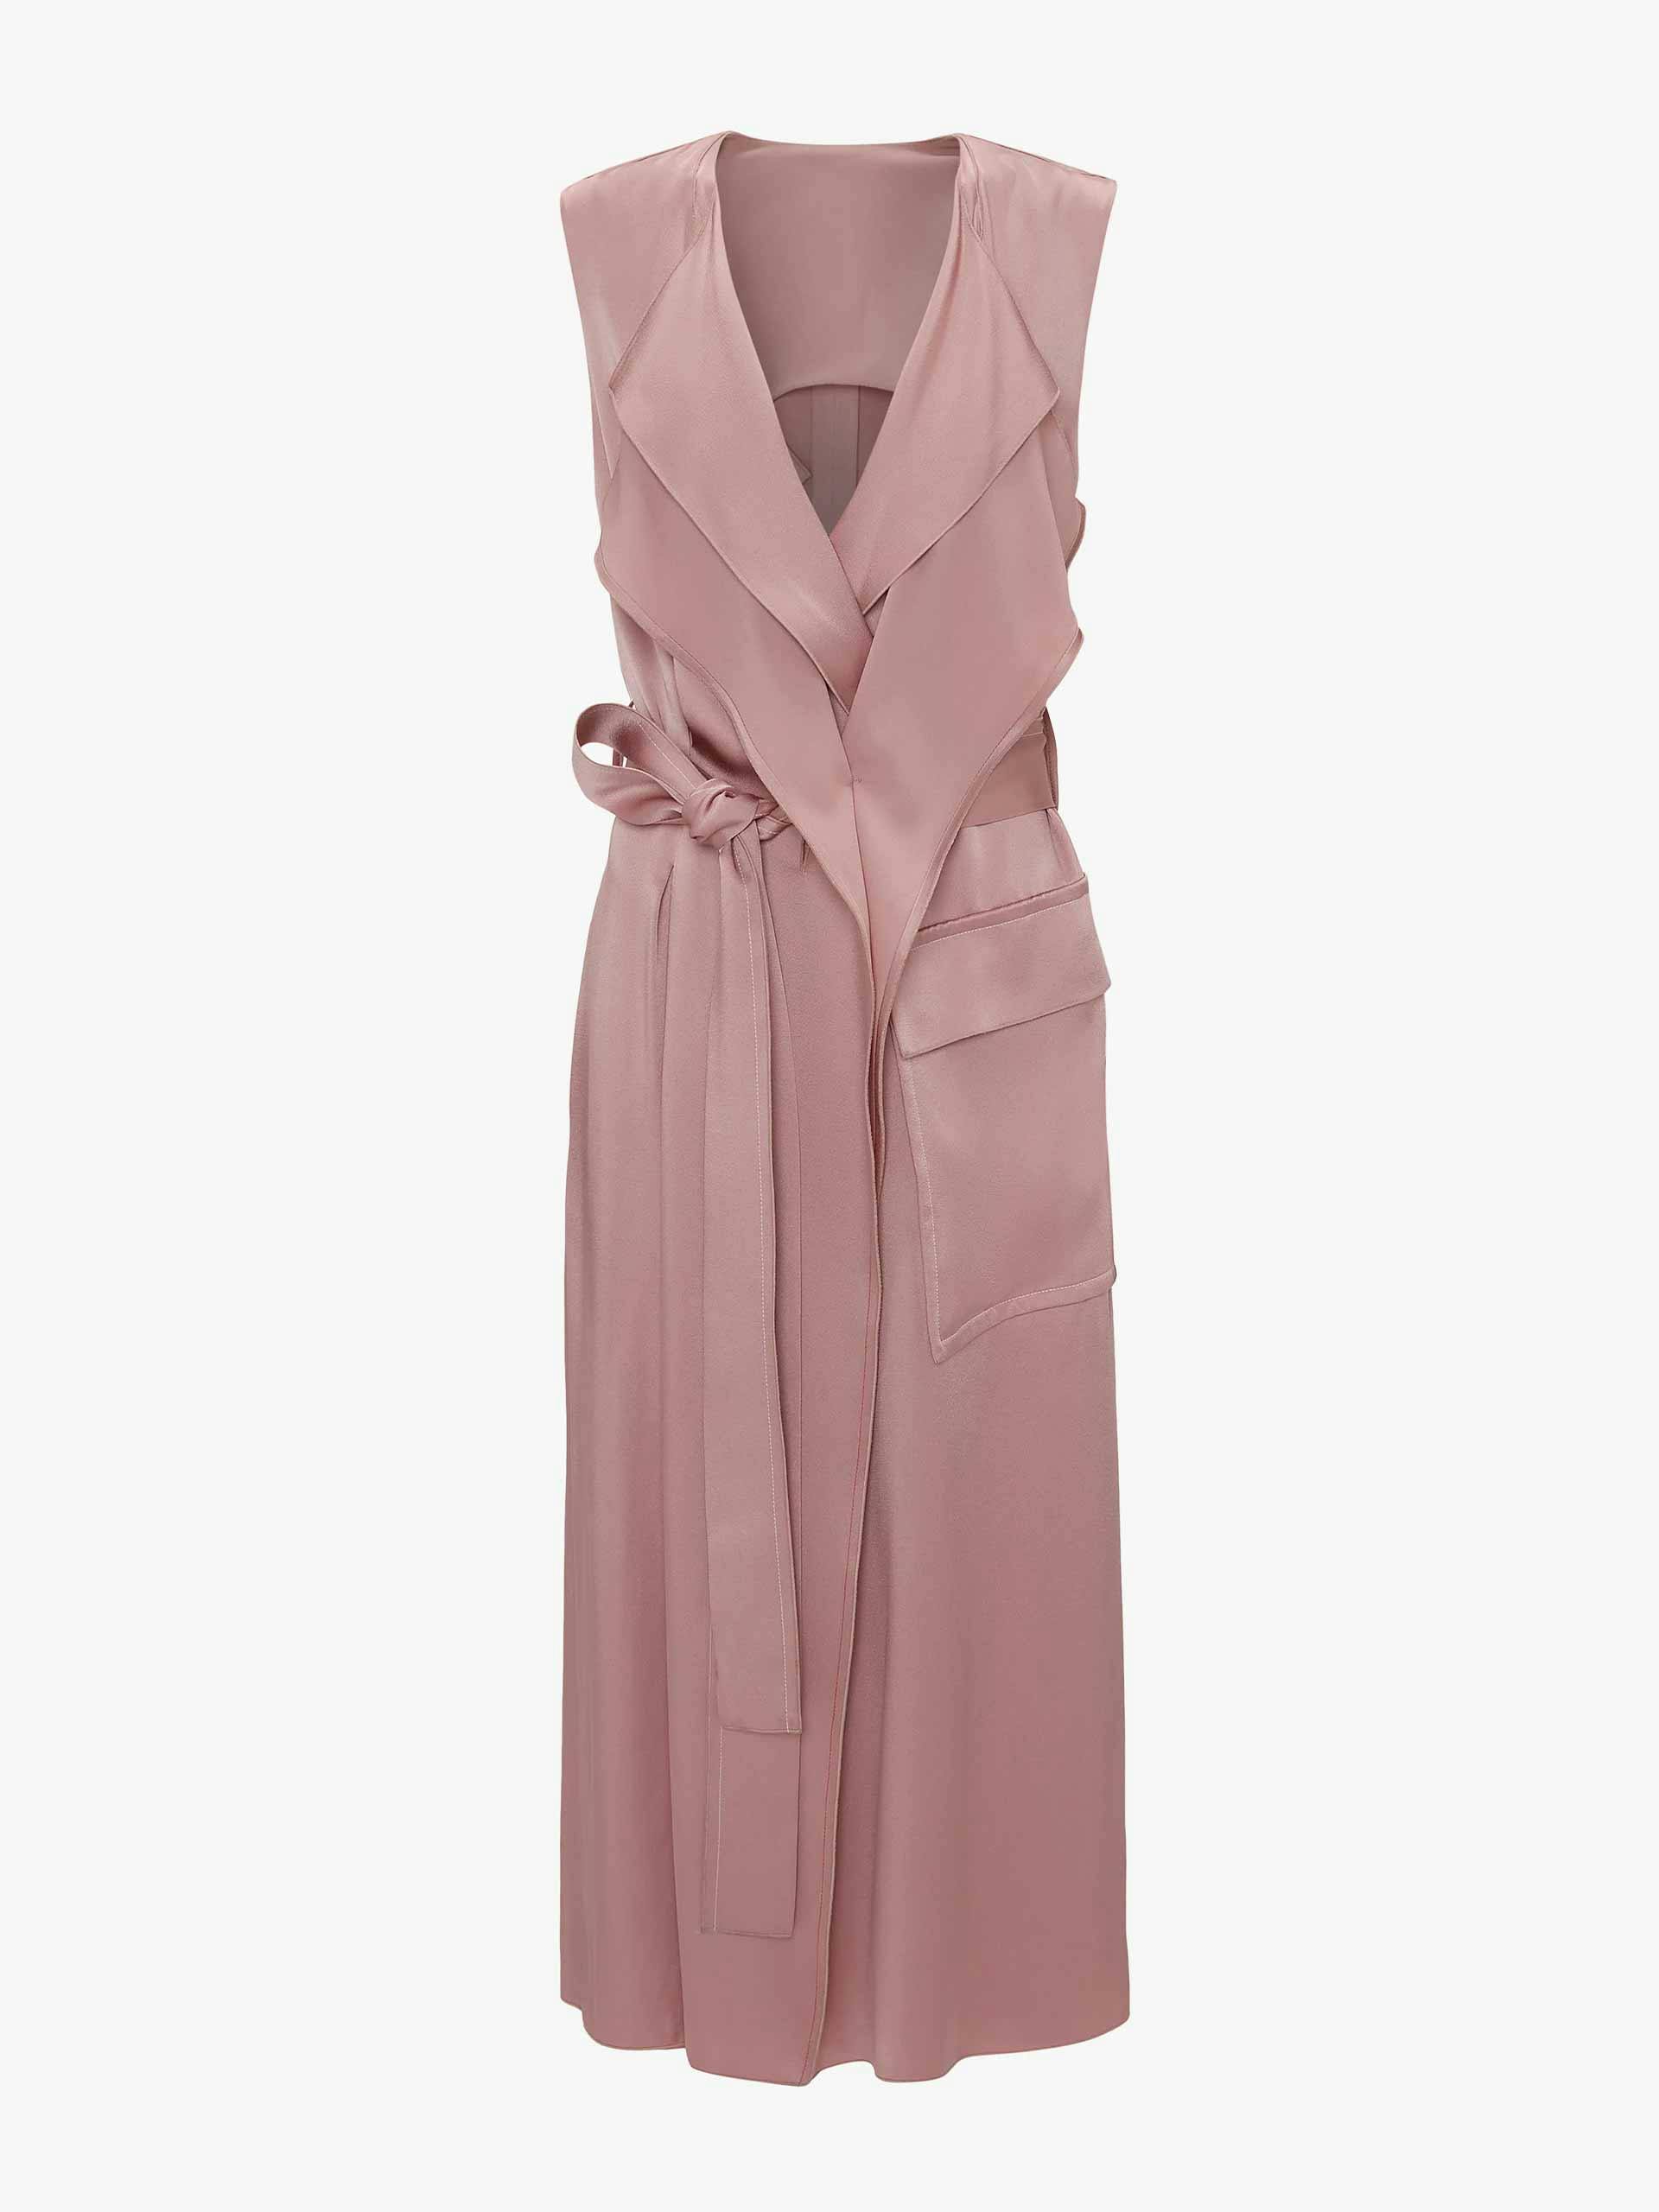 Pink trench dress